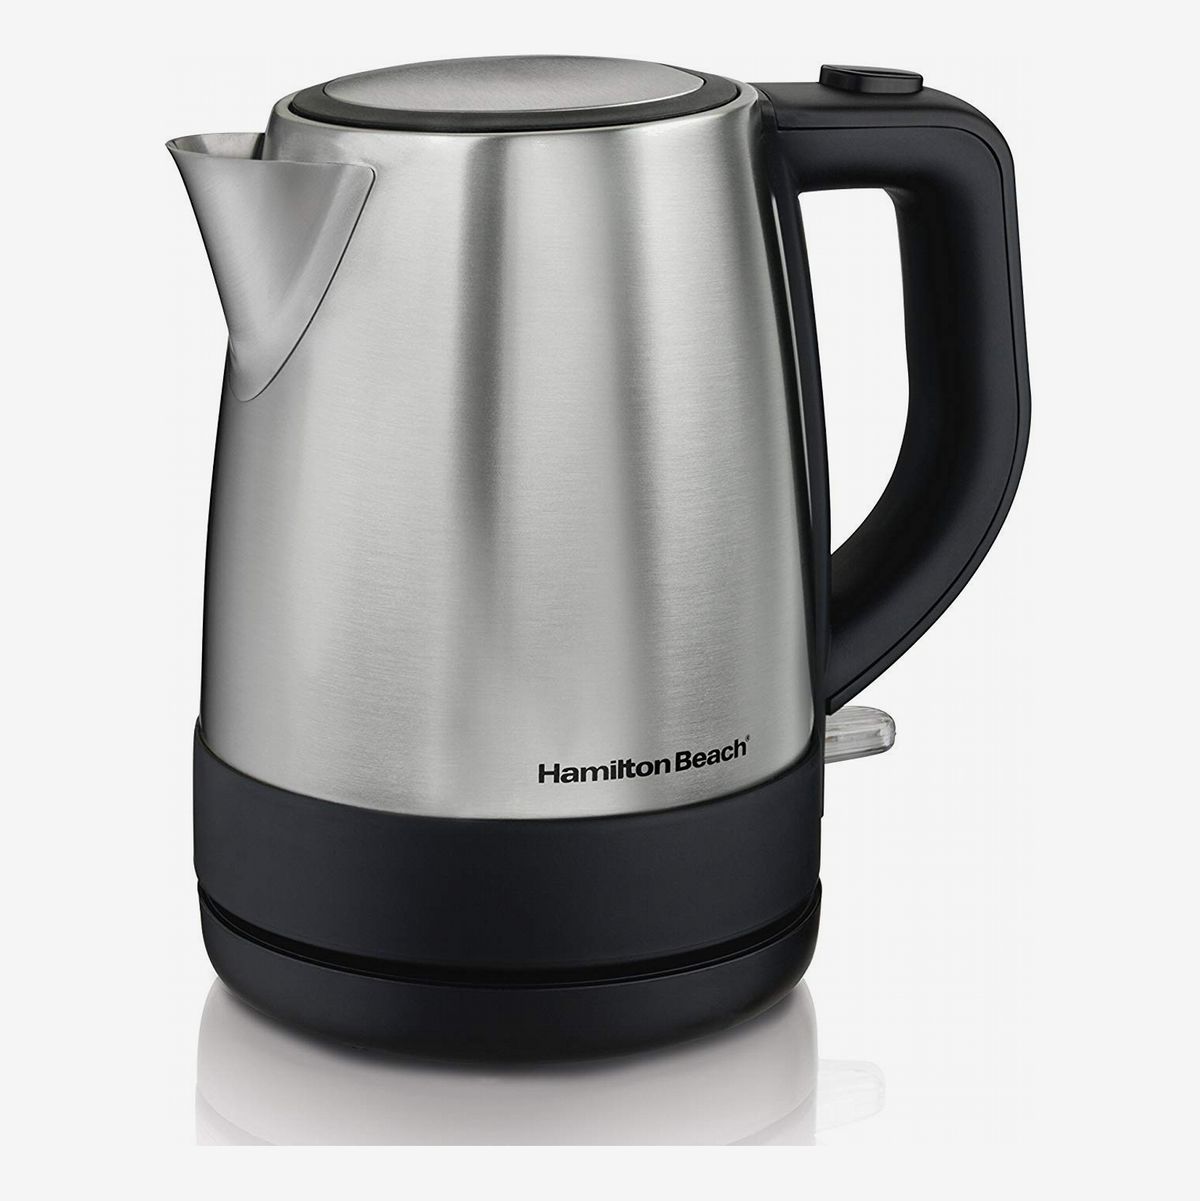 13 Best Electric Kettles 2020 | The 